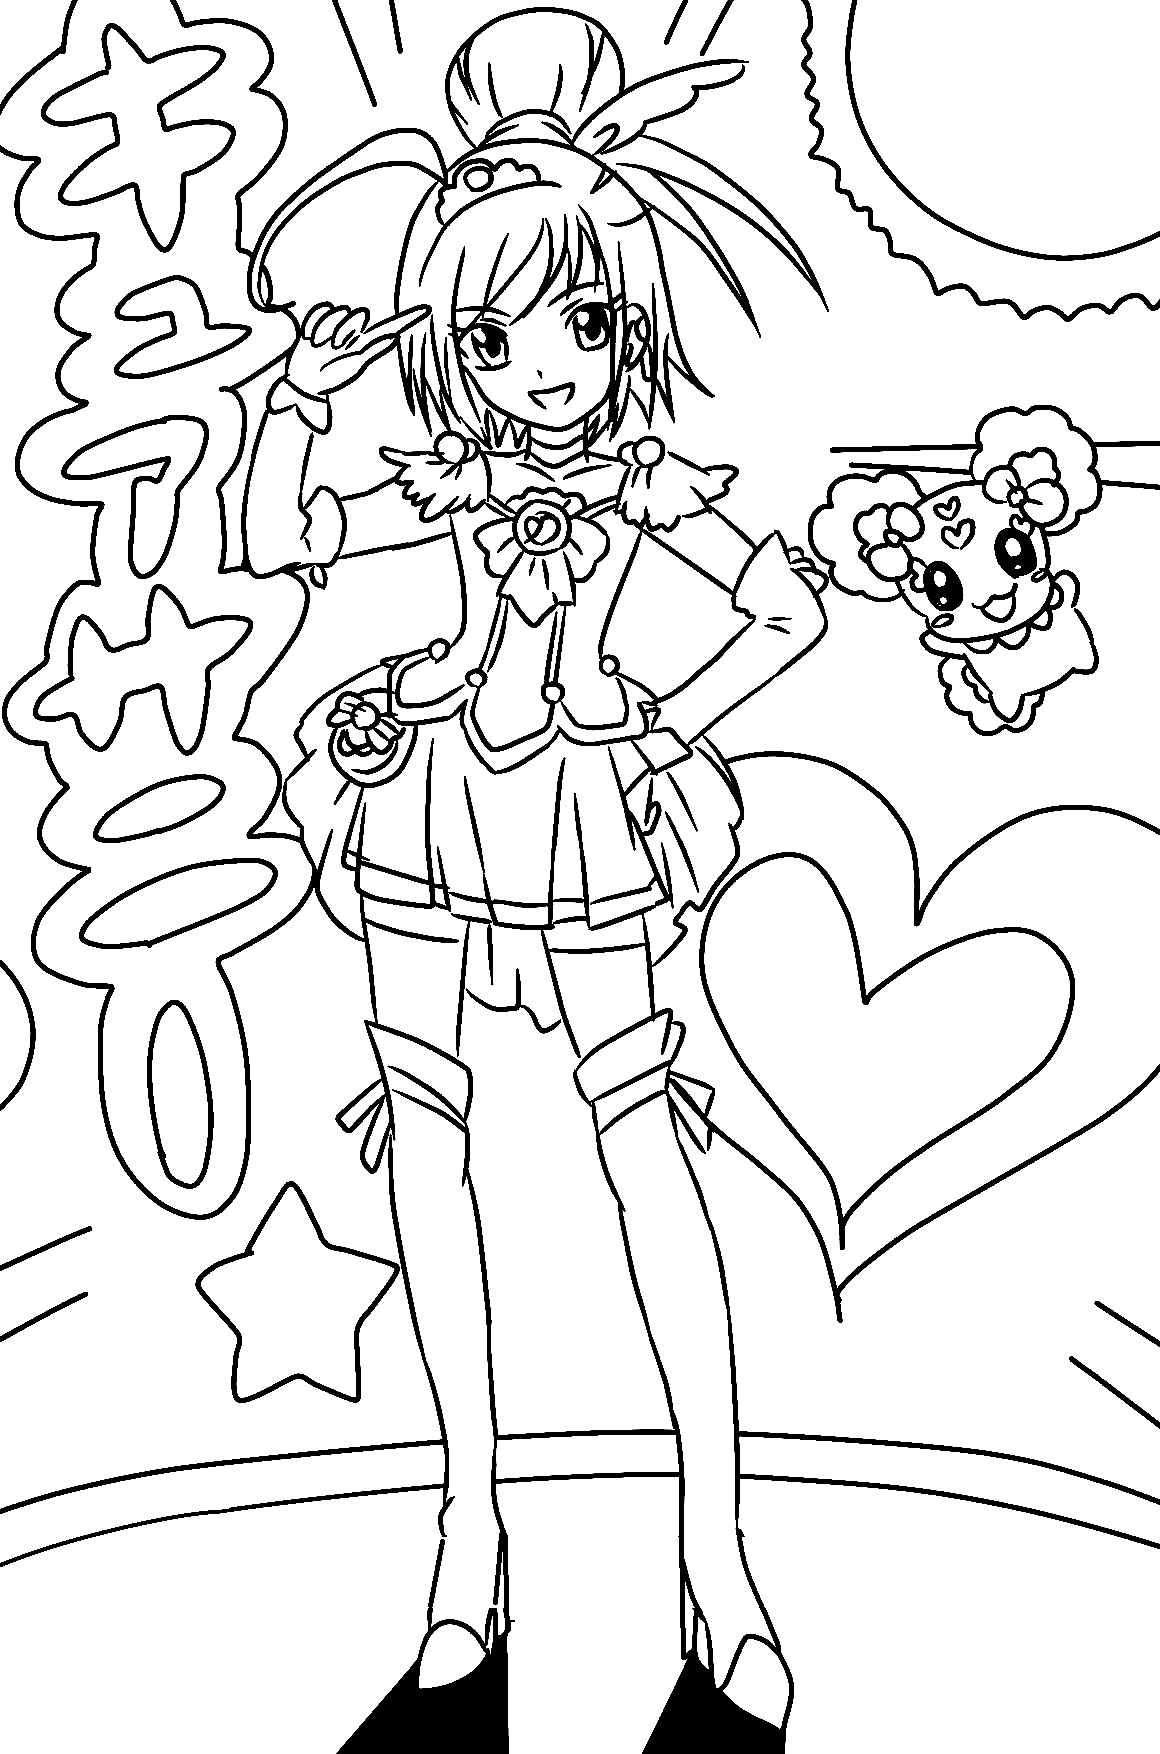 Glitter Sunny Kelsey Coloring Page